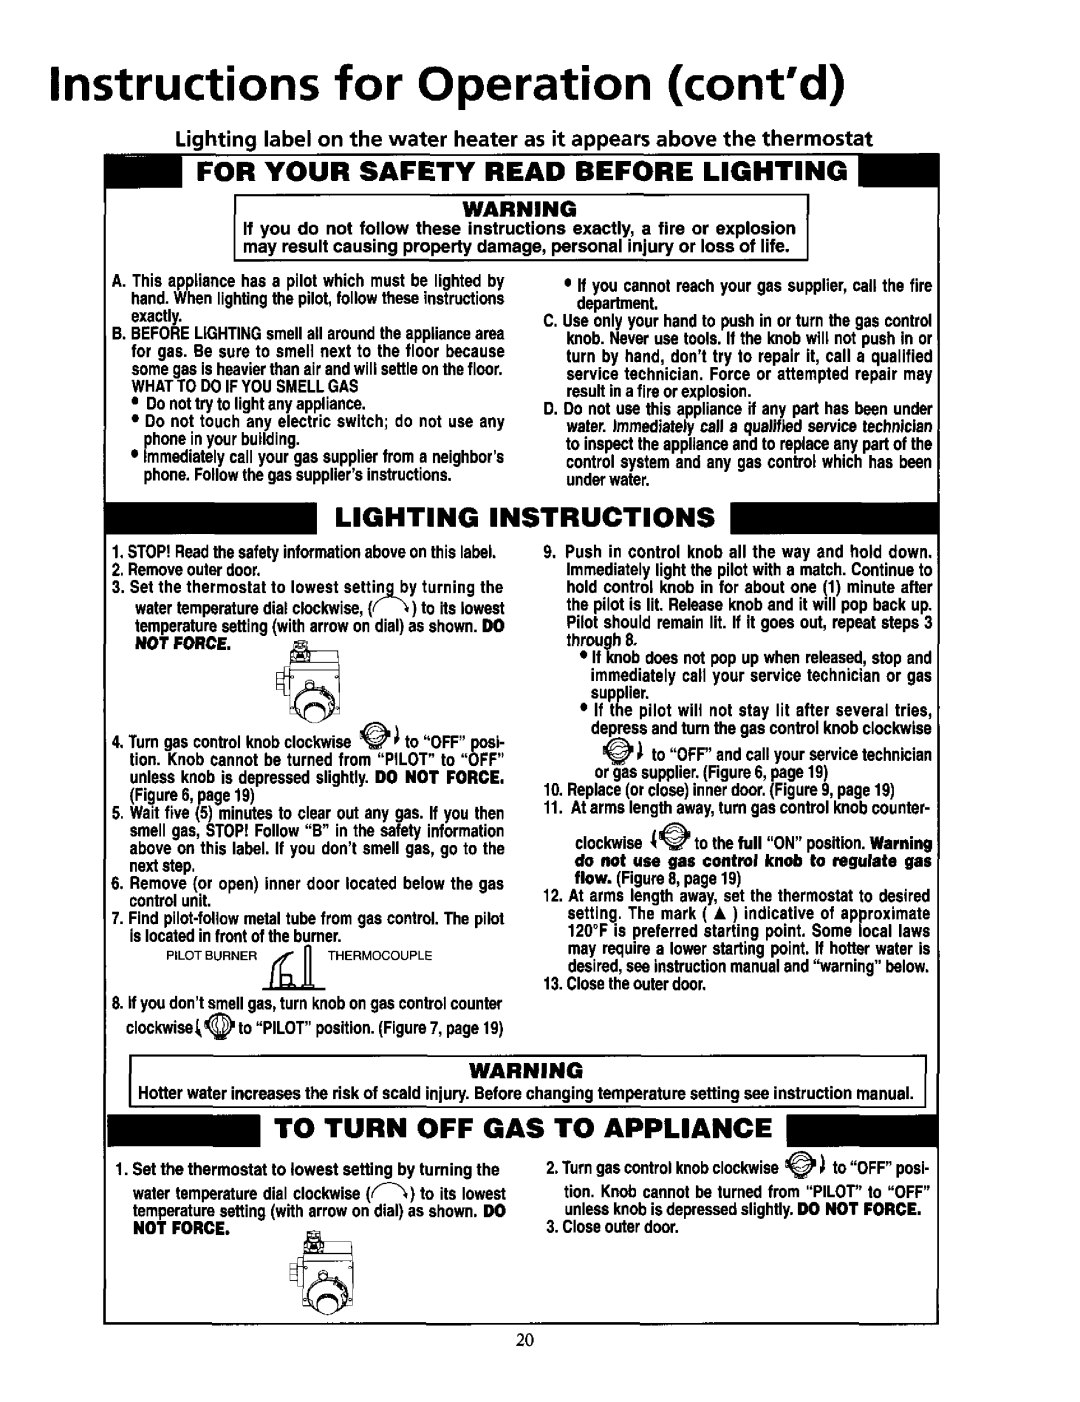 Maytag HN51240X manual Instructions for Operation contd, For Your Safety Read Before Lighting, To Turn Off Gas To Appliance 